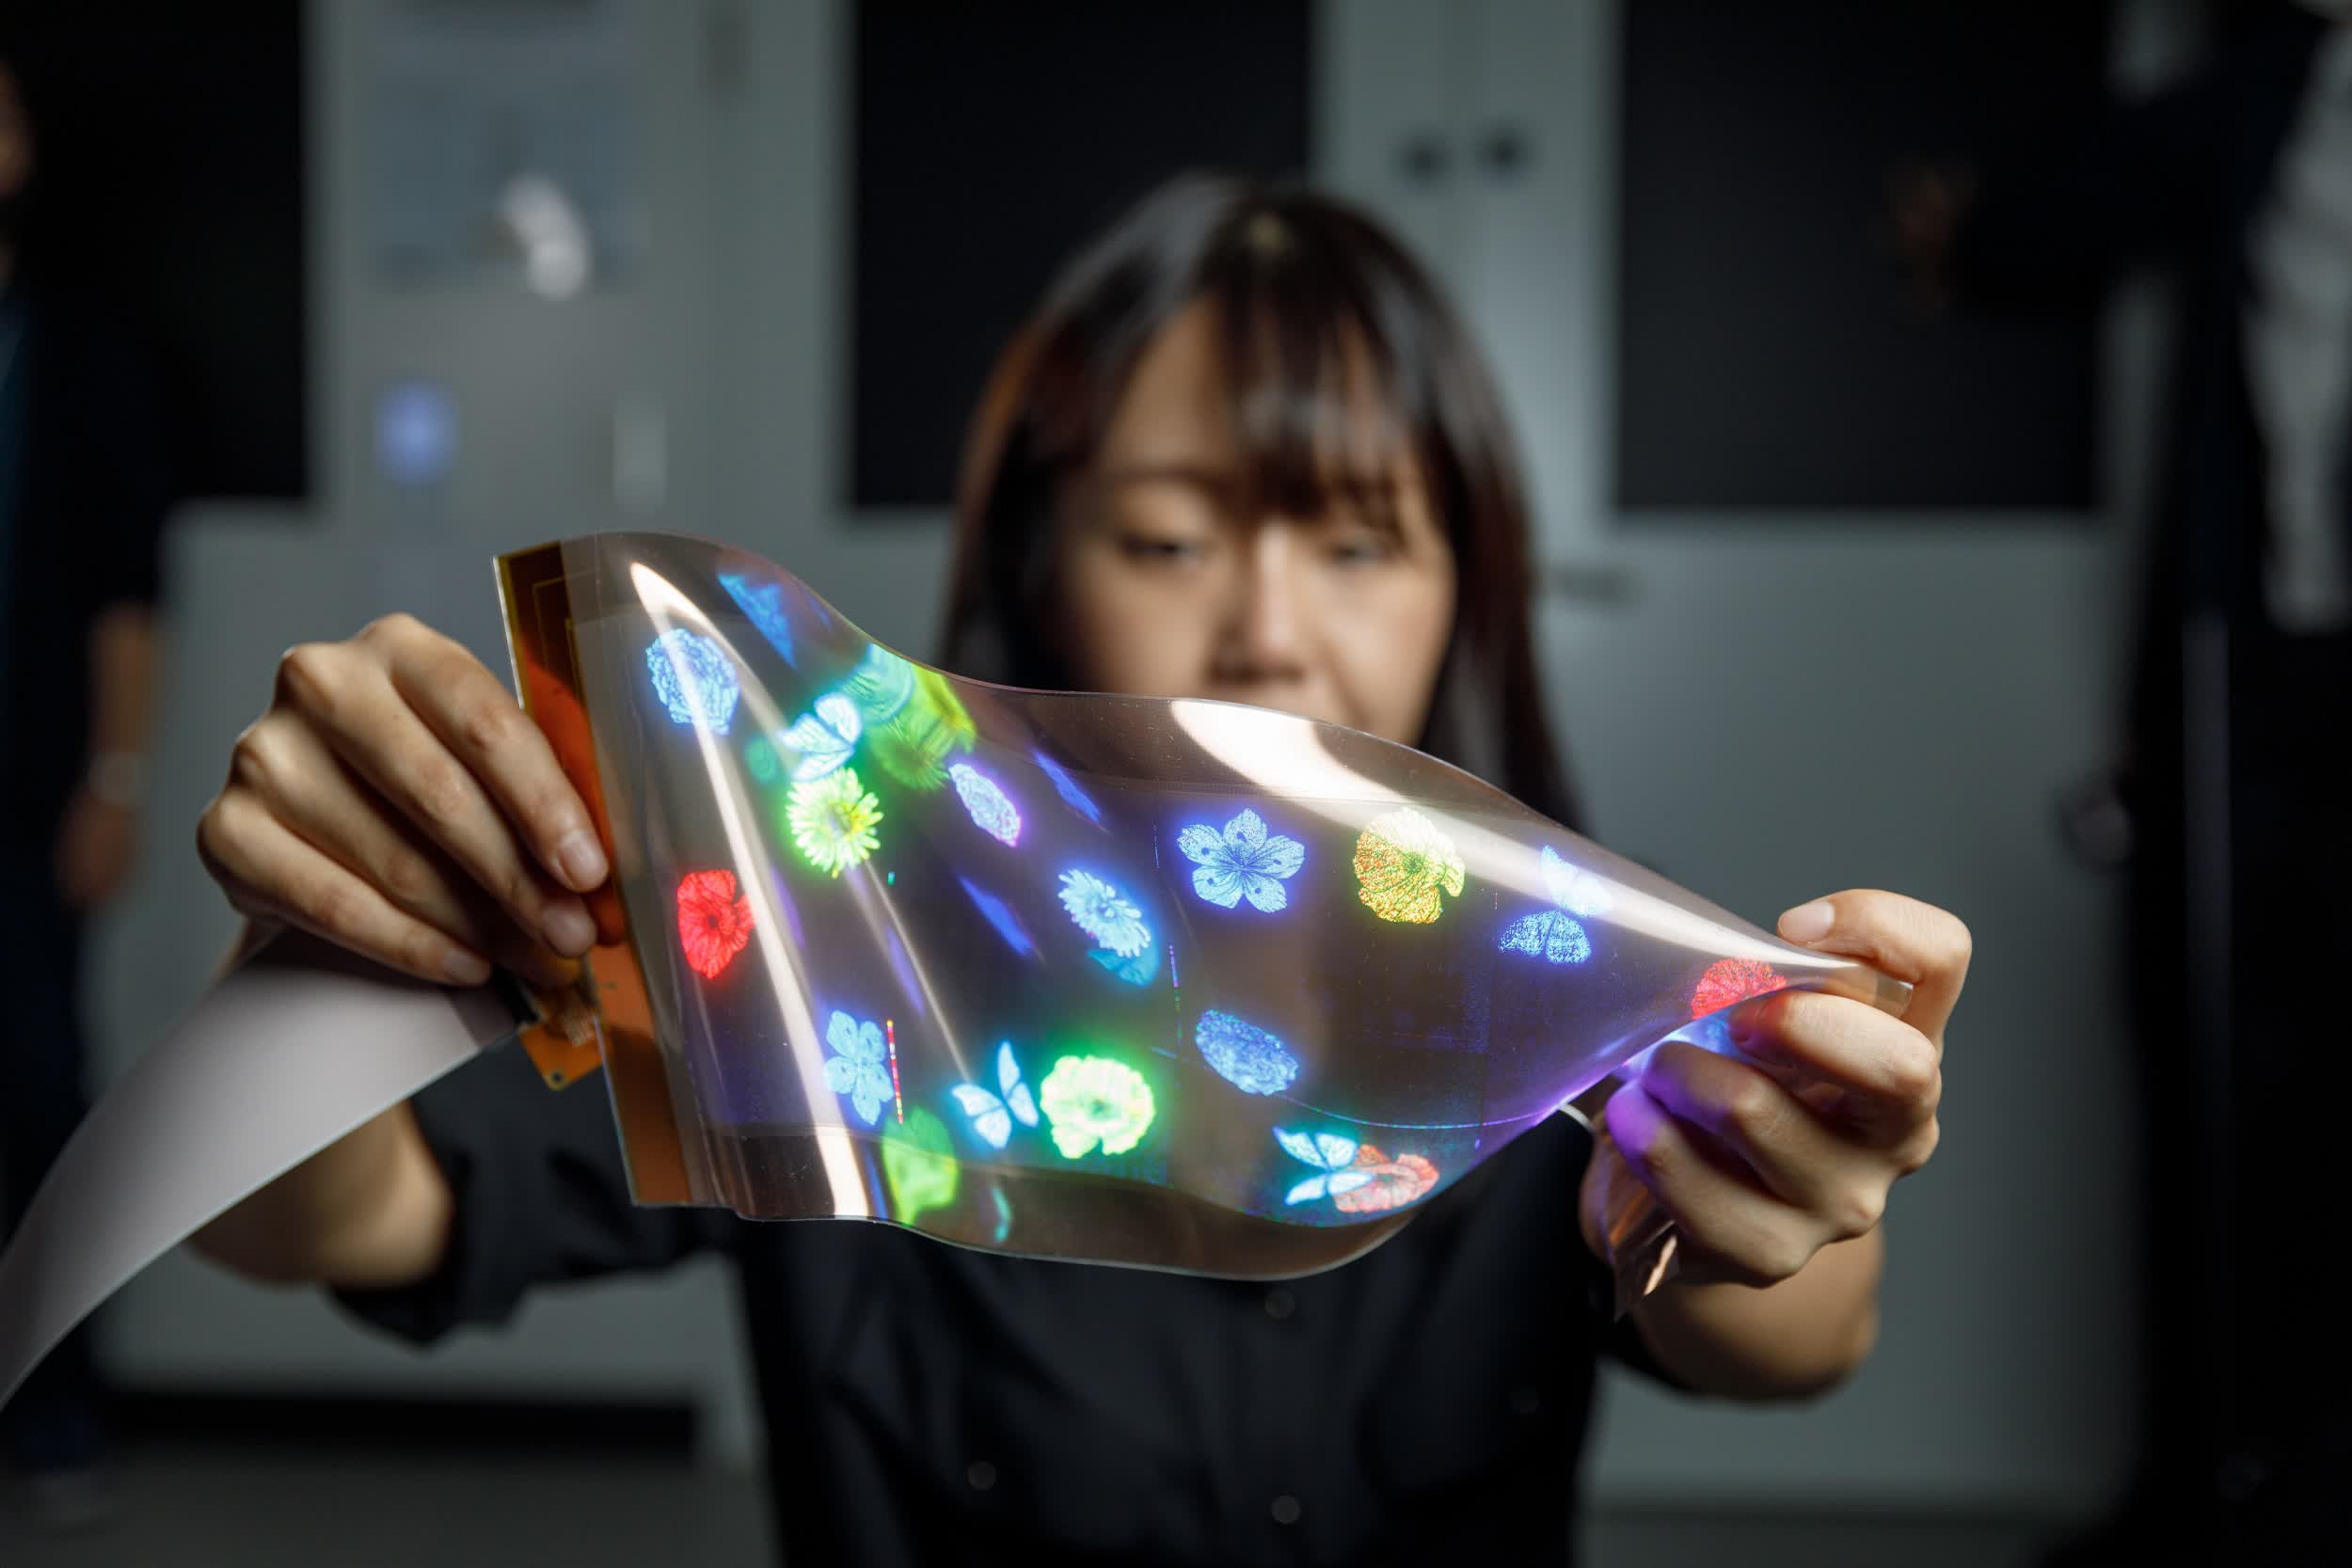 LG unveils high-resolution display that can stretch up to 20%